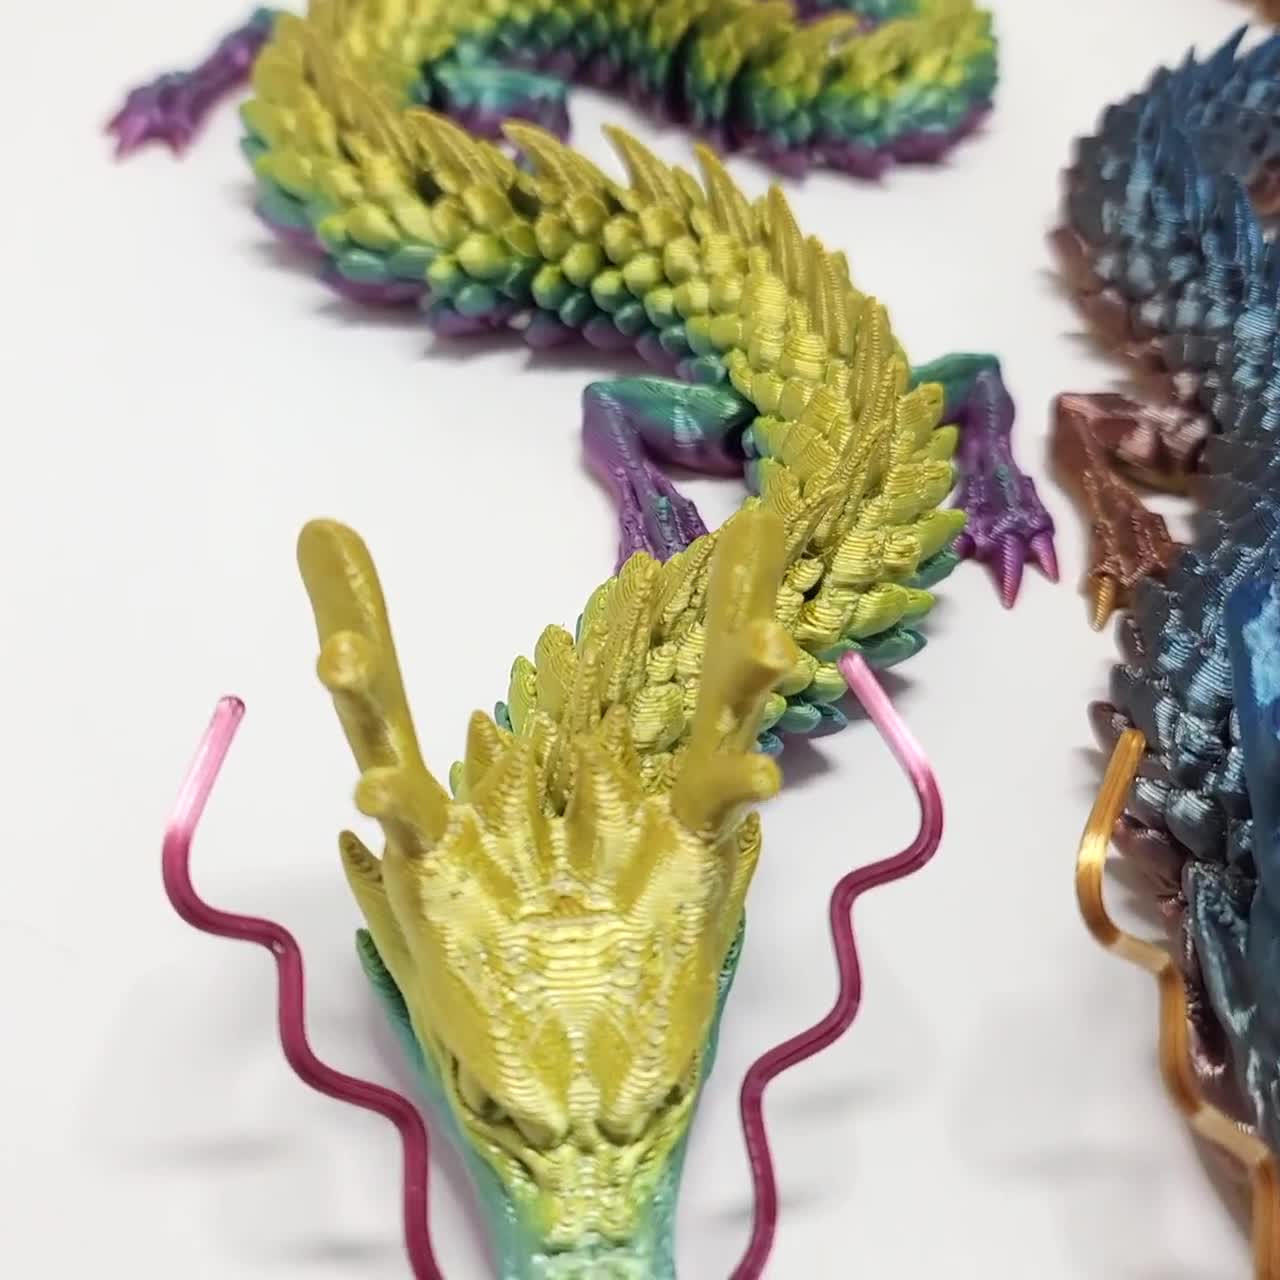 GIANT 3D Printed Crystal Dragon Articulated Fidget Desk Toy Gift 